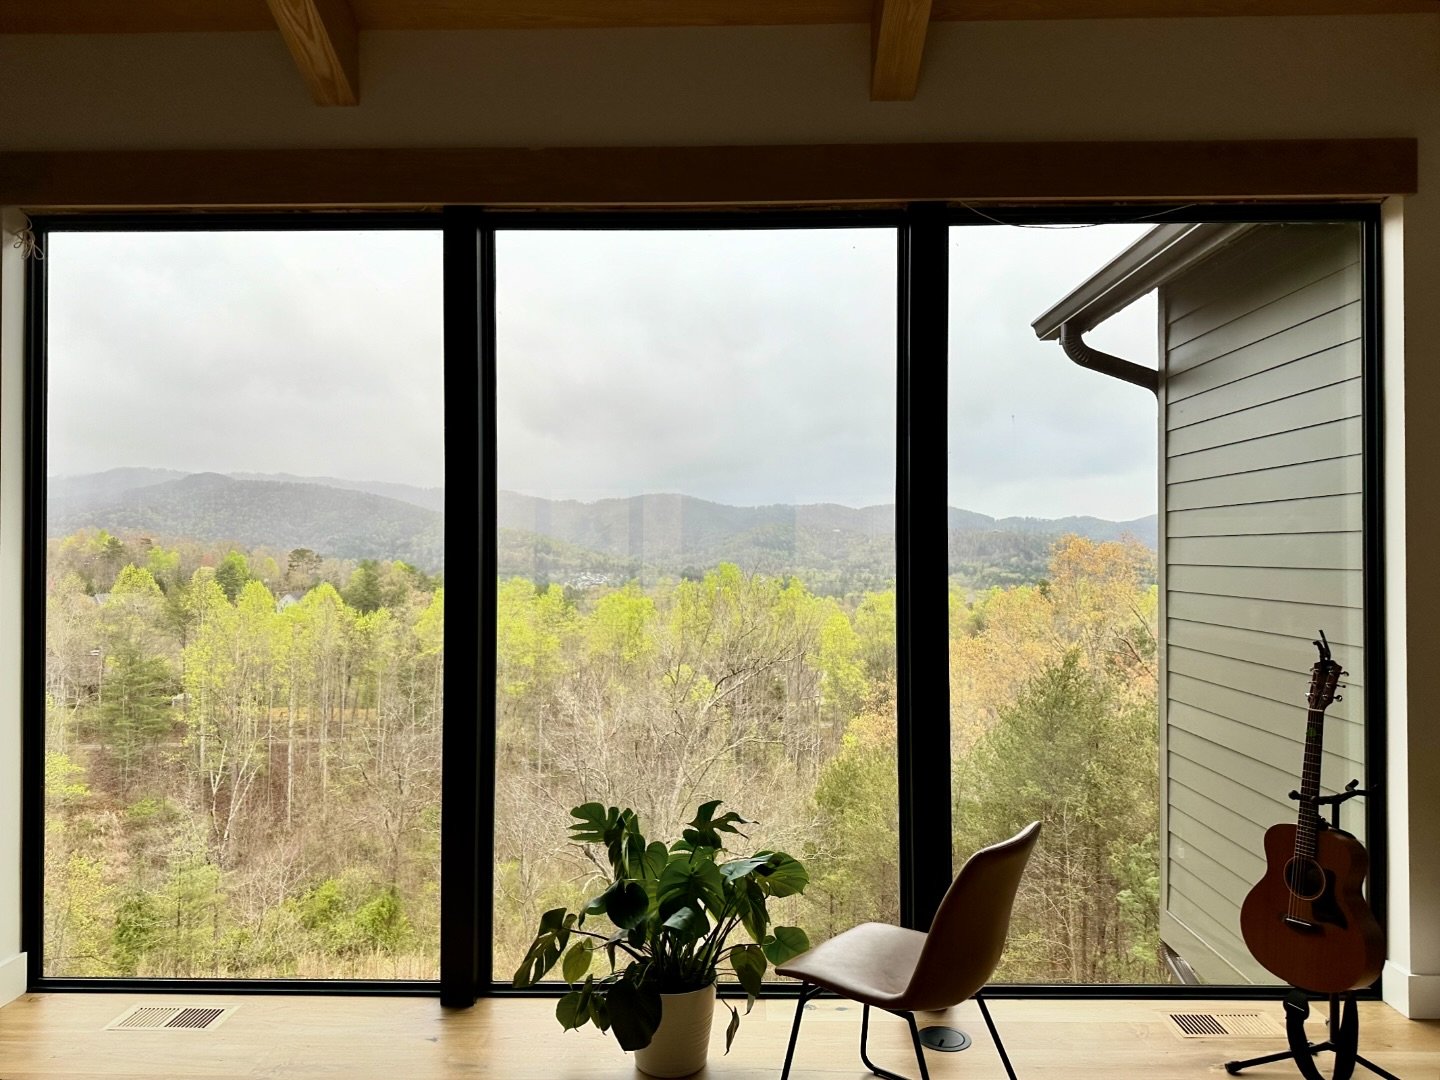 Rainy day. 

#views #mountains #houses #realestate #architecture #house #home #homes #design #interiordesign #realtor #luxury #property #homesweethome #photography #luxuryhomes #homedecor #realestateagent #interior #dreamhome #homedesign #housedesign